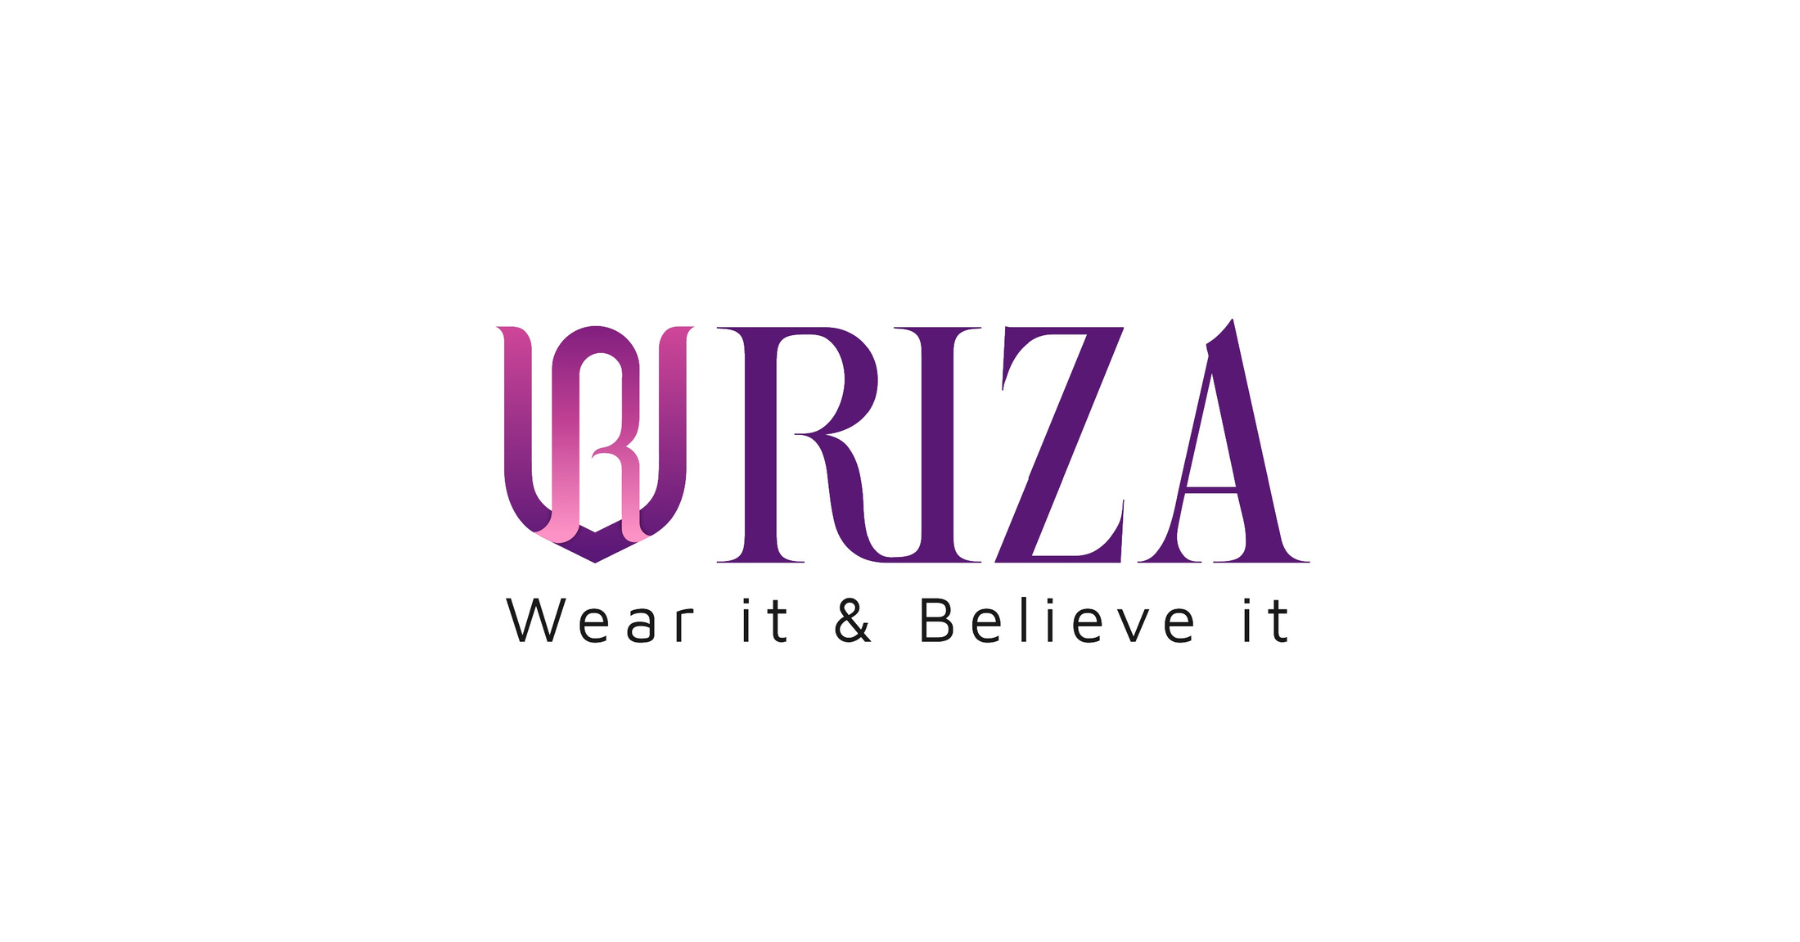 Riza Intimates on Instagram: ntroducing Riza T-Fit, the comfortable,  full-coverage bra made from 100% hosiery cotton fabric. With its smooth,  seam-free cups, gentle support, and breathable comfort, Riza T-Fit is the  perfect